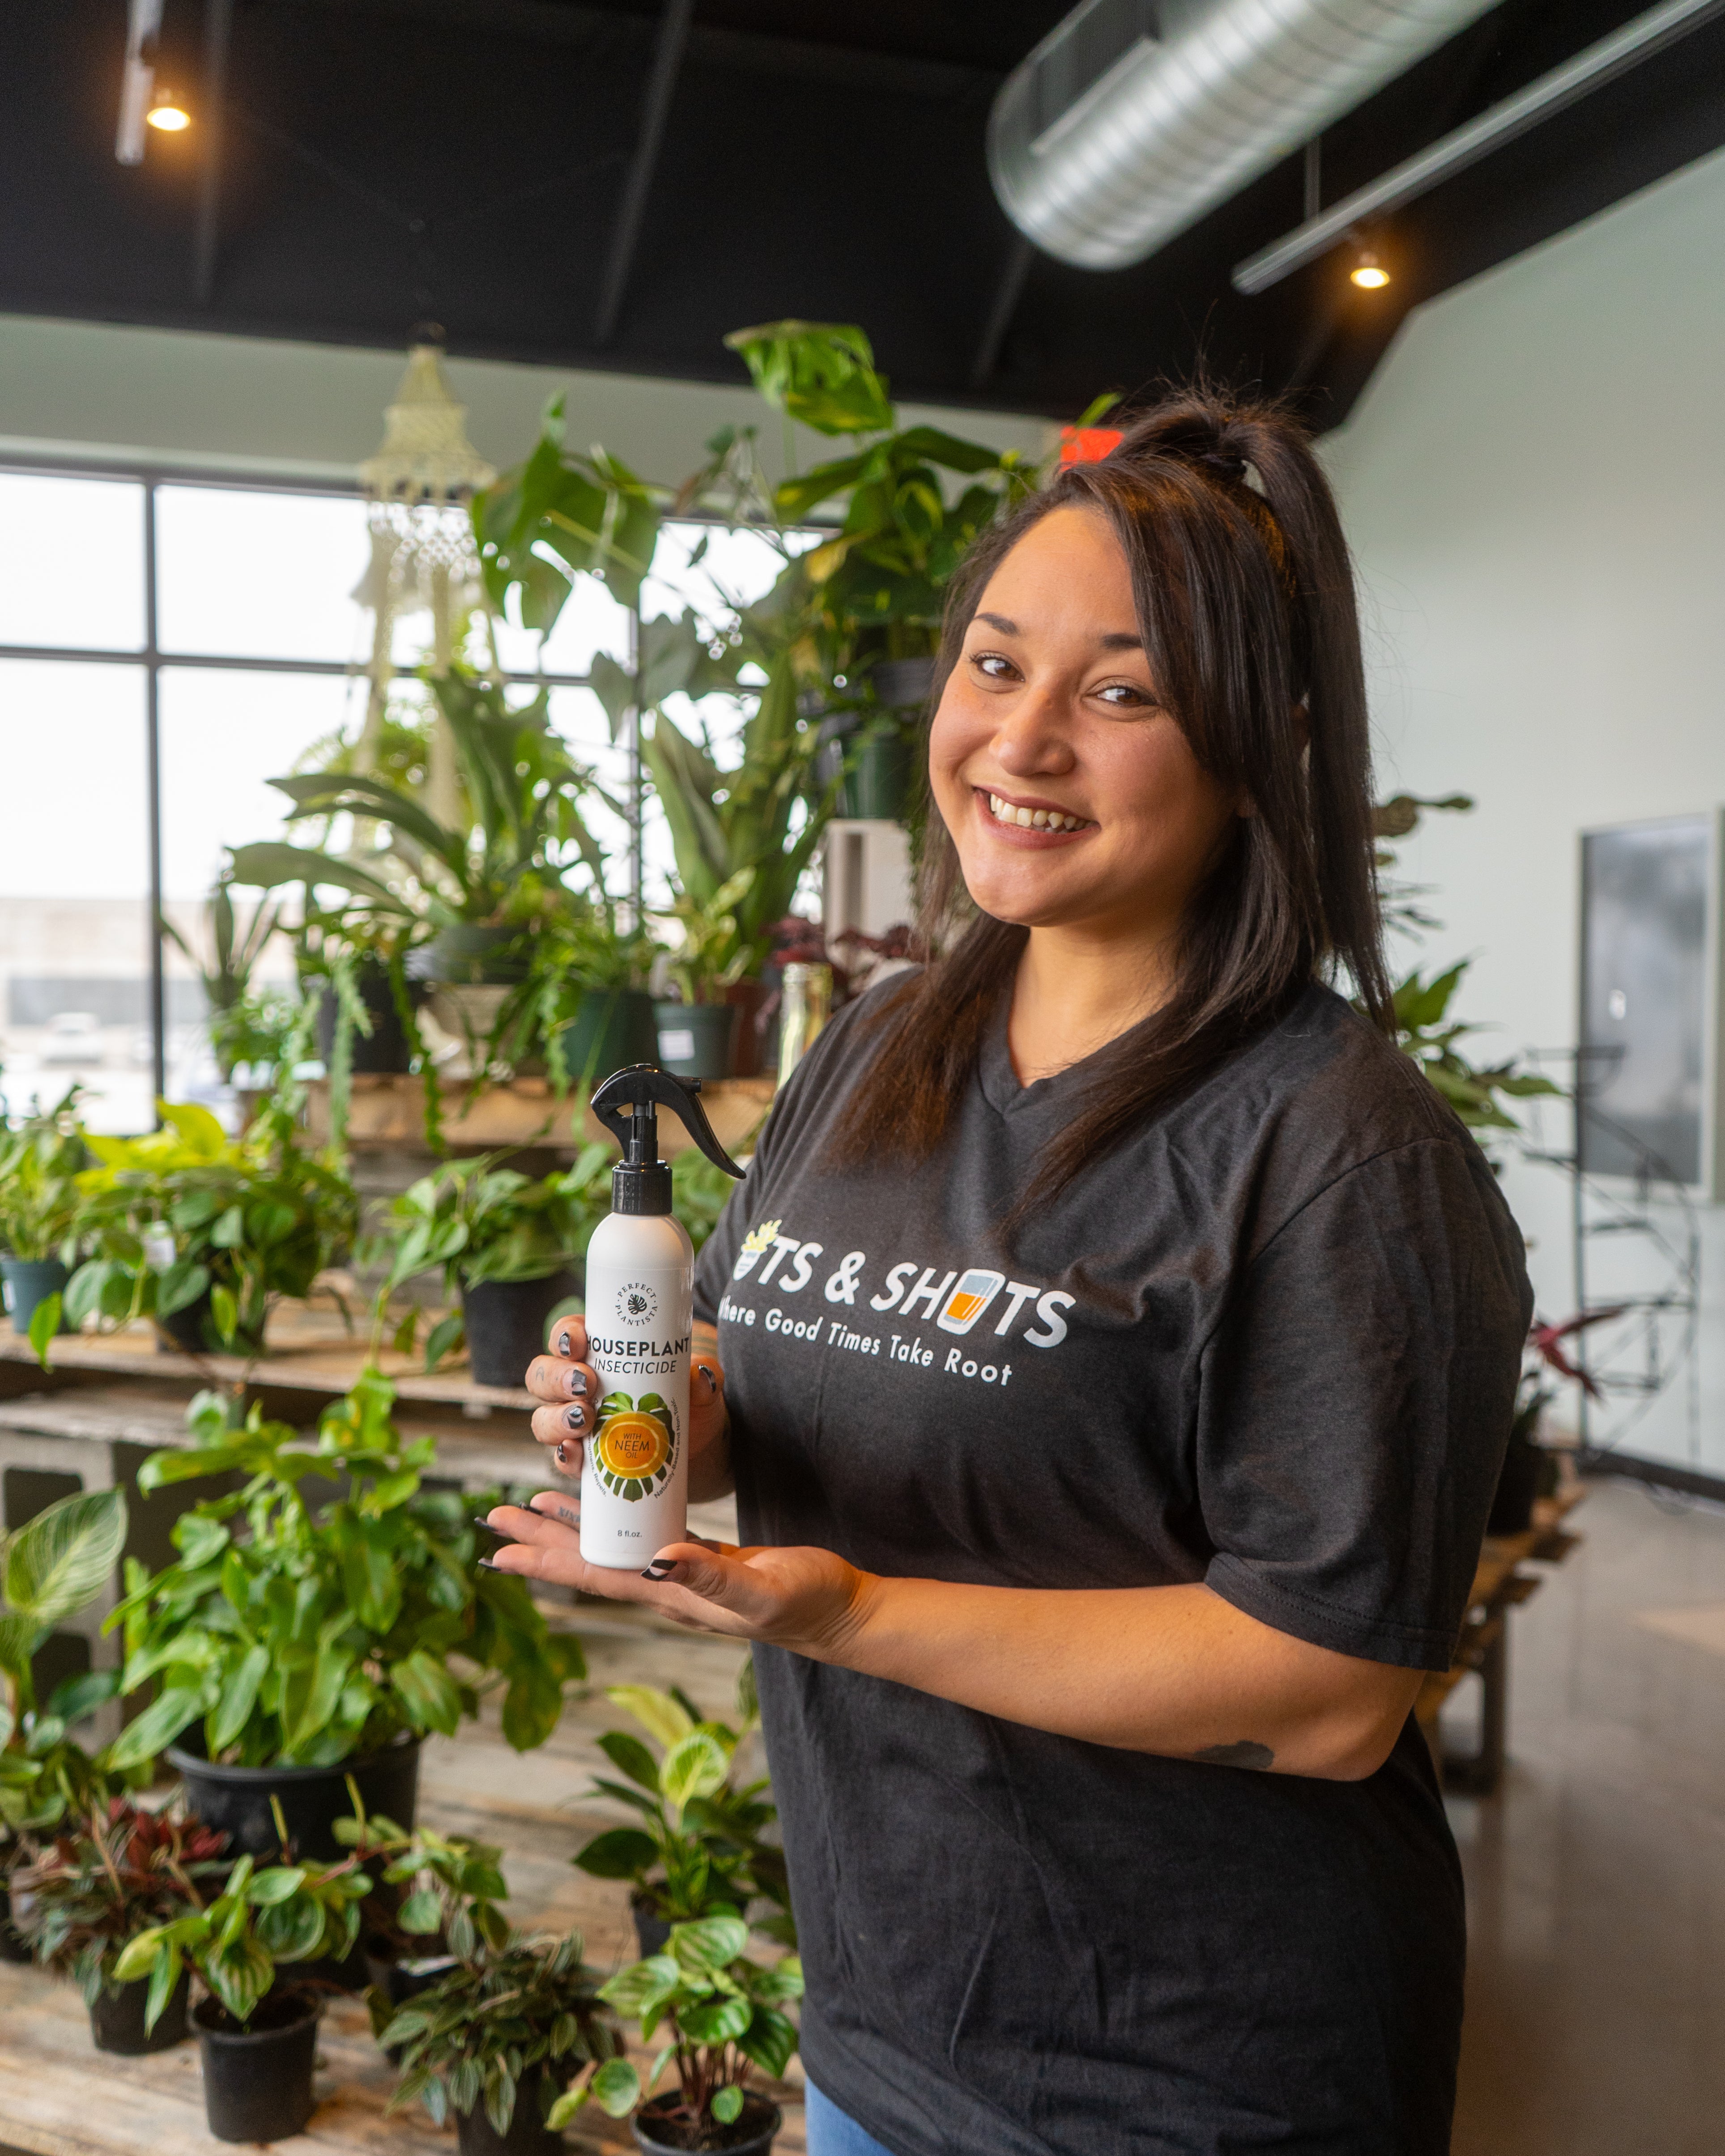 Temeshia Bomato, owner of Pots and Shots holding a bottle of Perfect Plantista's Houseplant Insecticide